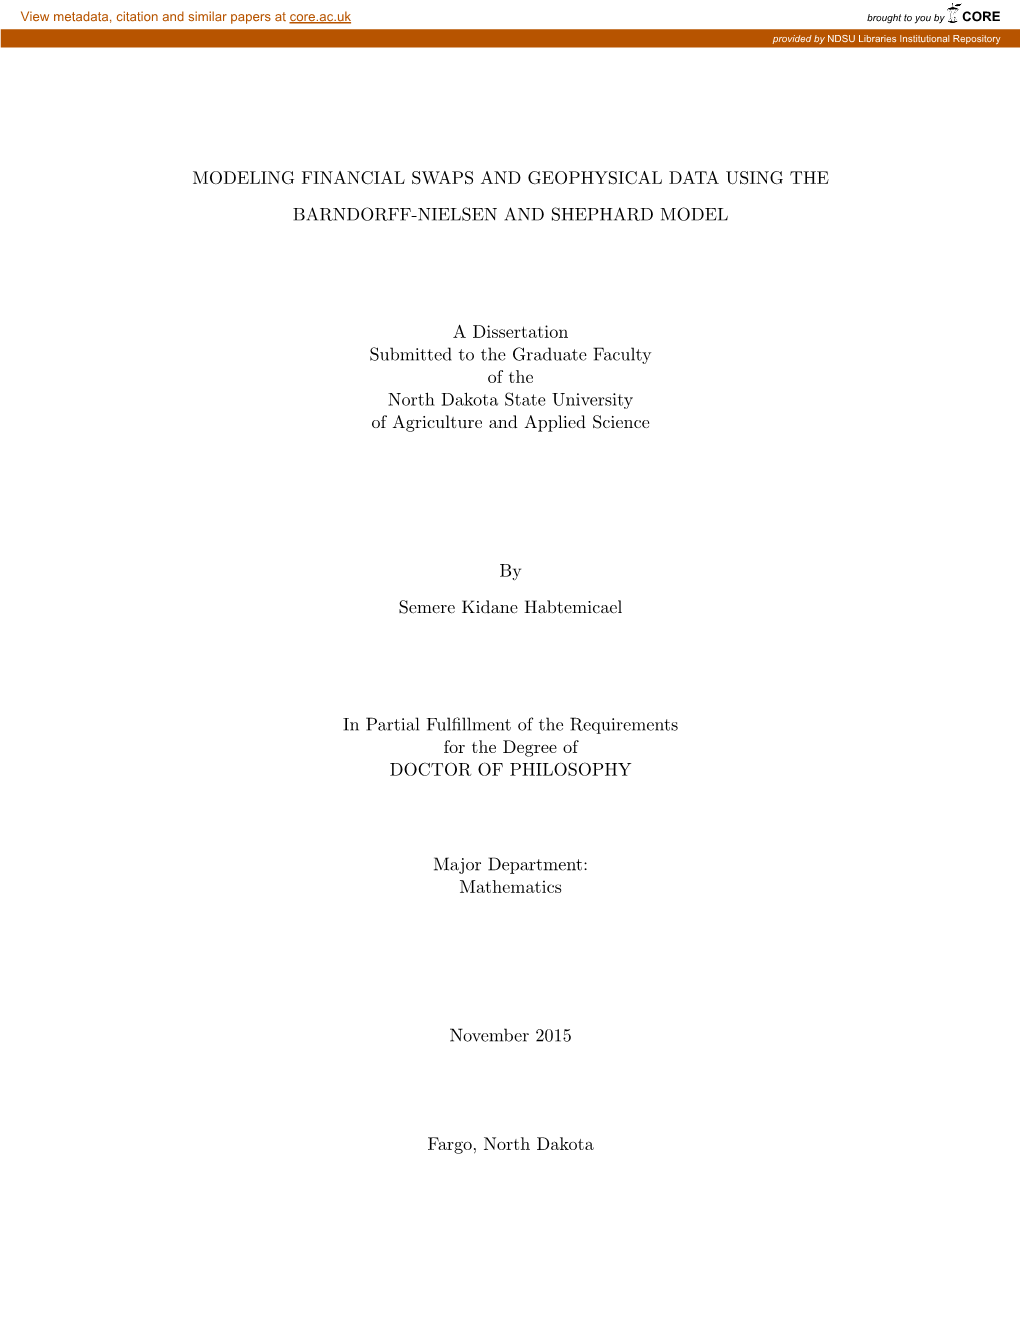 Modeling Financial Swaps and Geophysical Data Using The